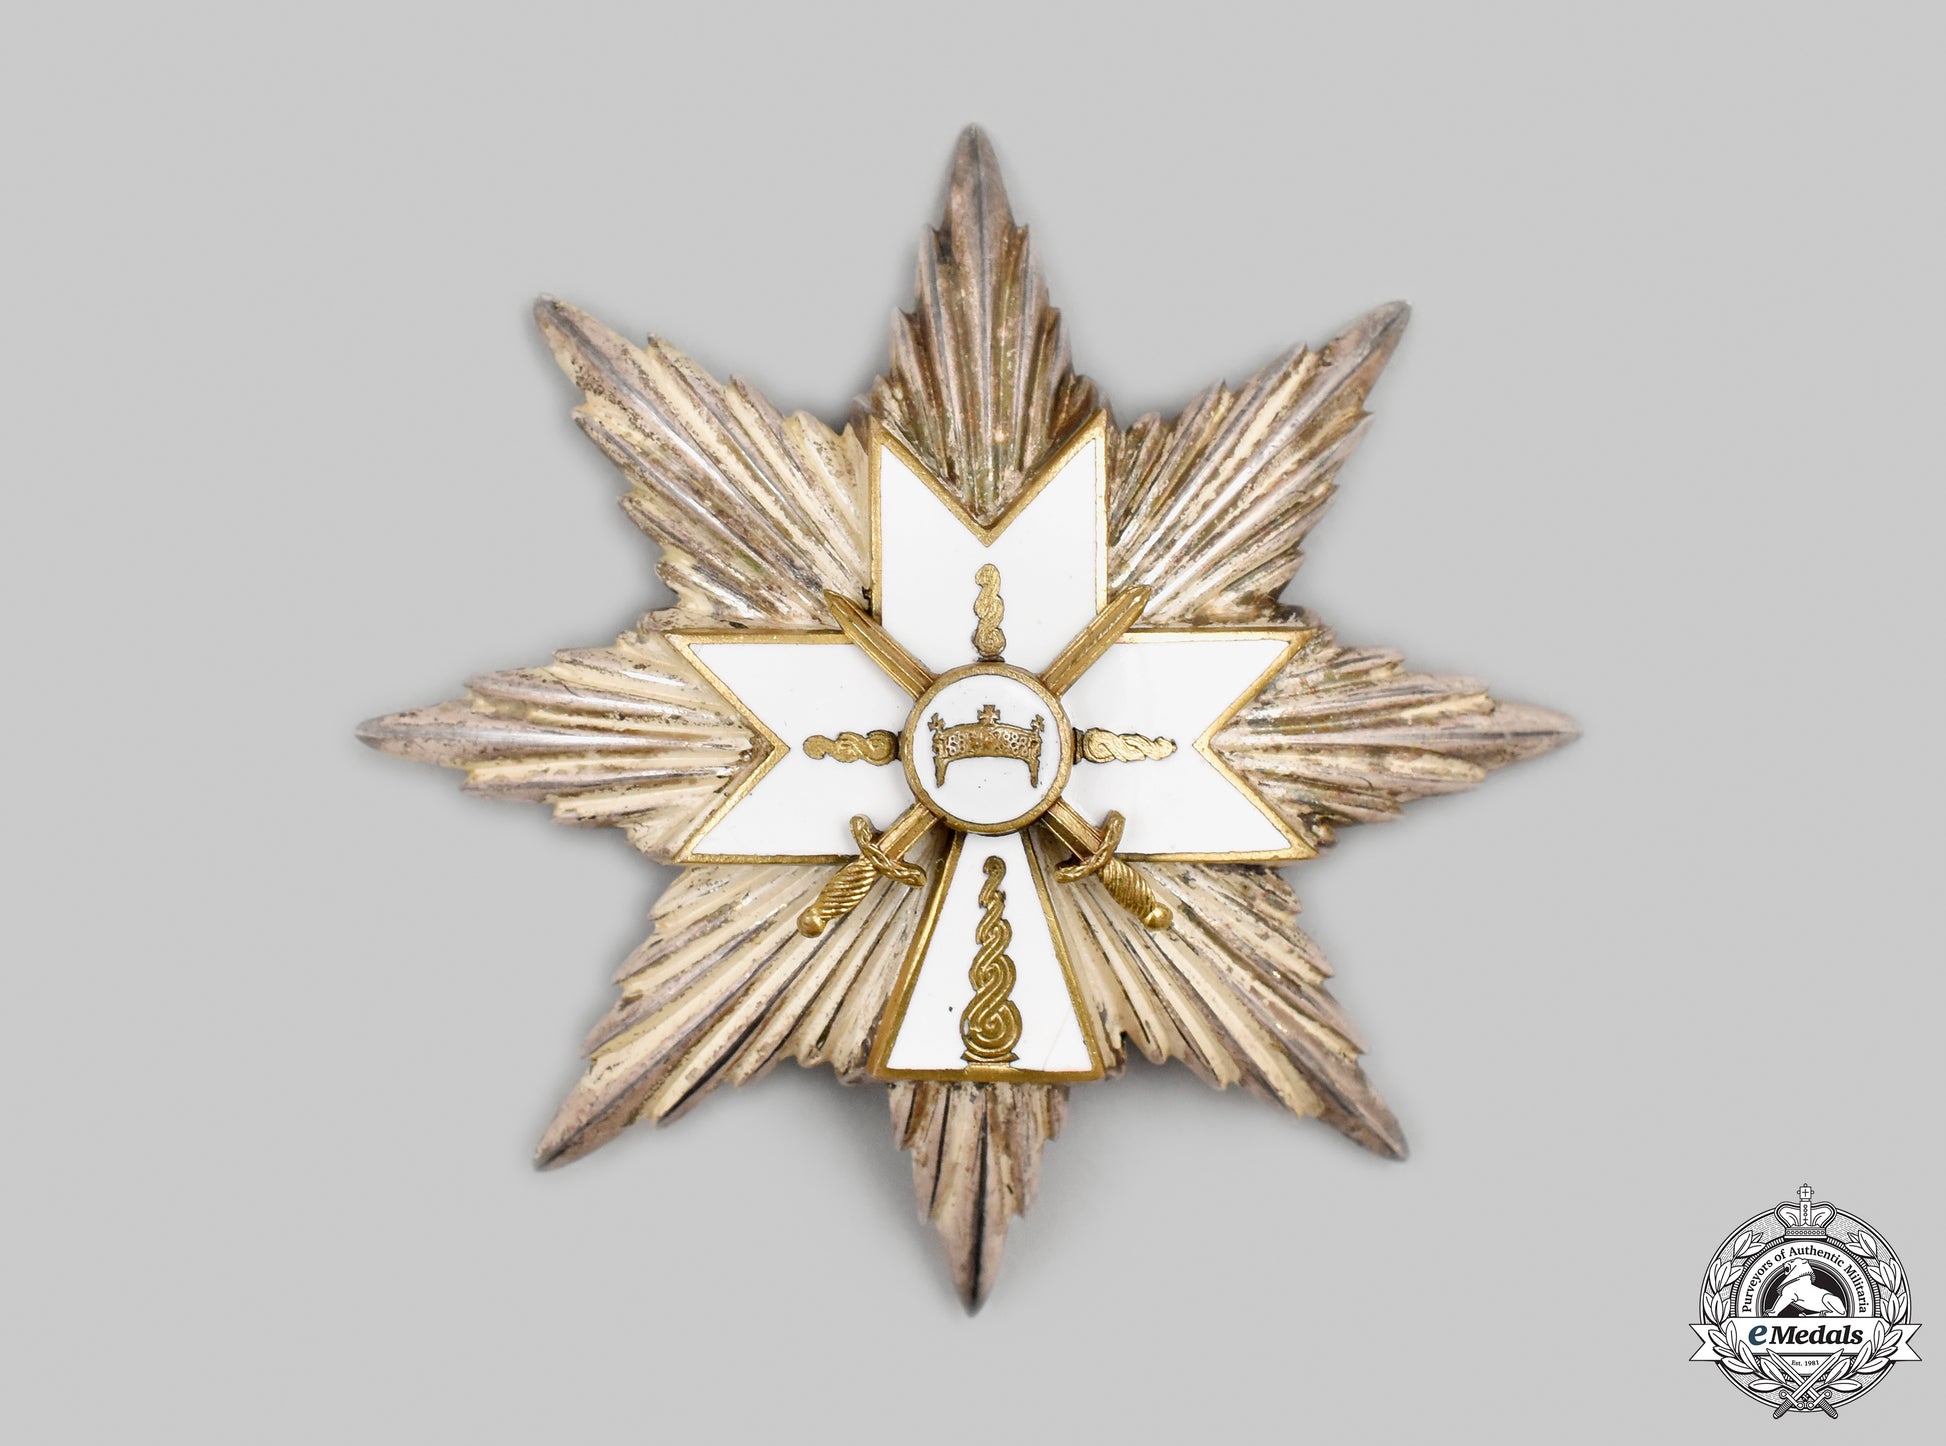 croatia,_independent_state._an_order_of_the_crown_of_king_zvonimir,_i_class_with_swords_star,_c.1942_cic2021__mnc6697_1